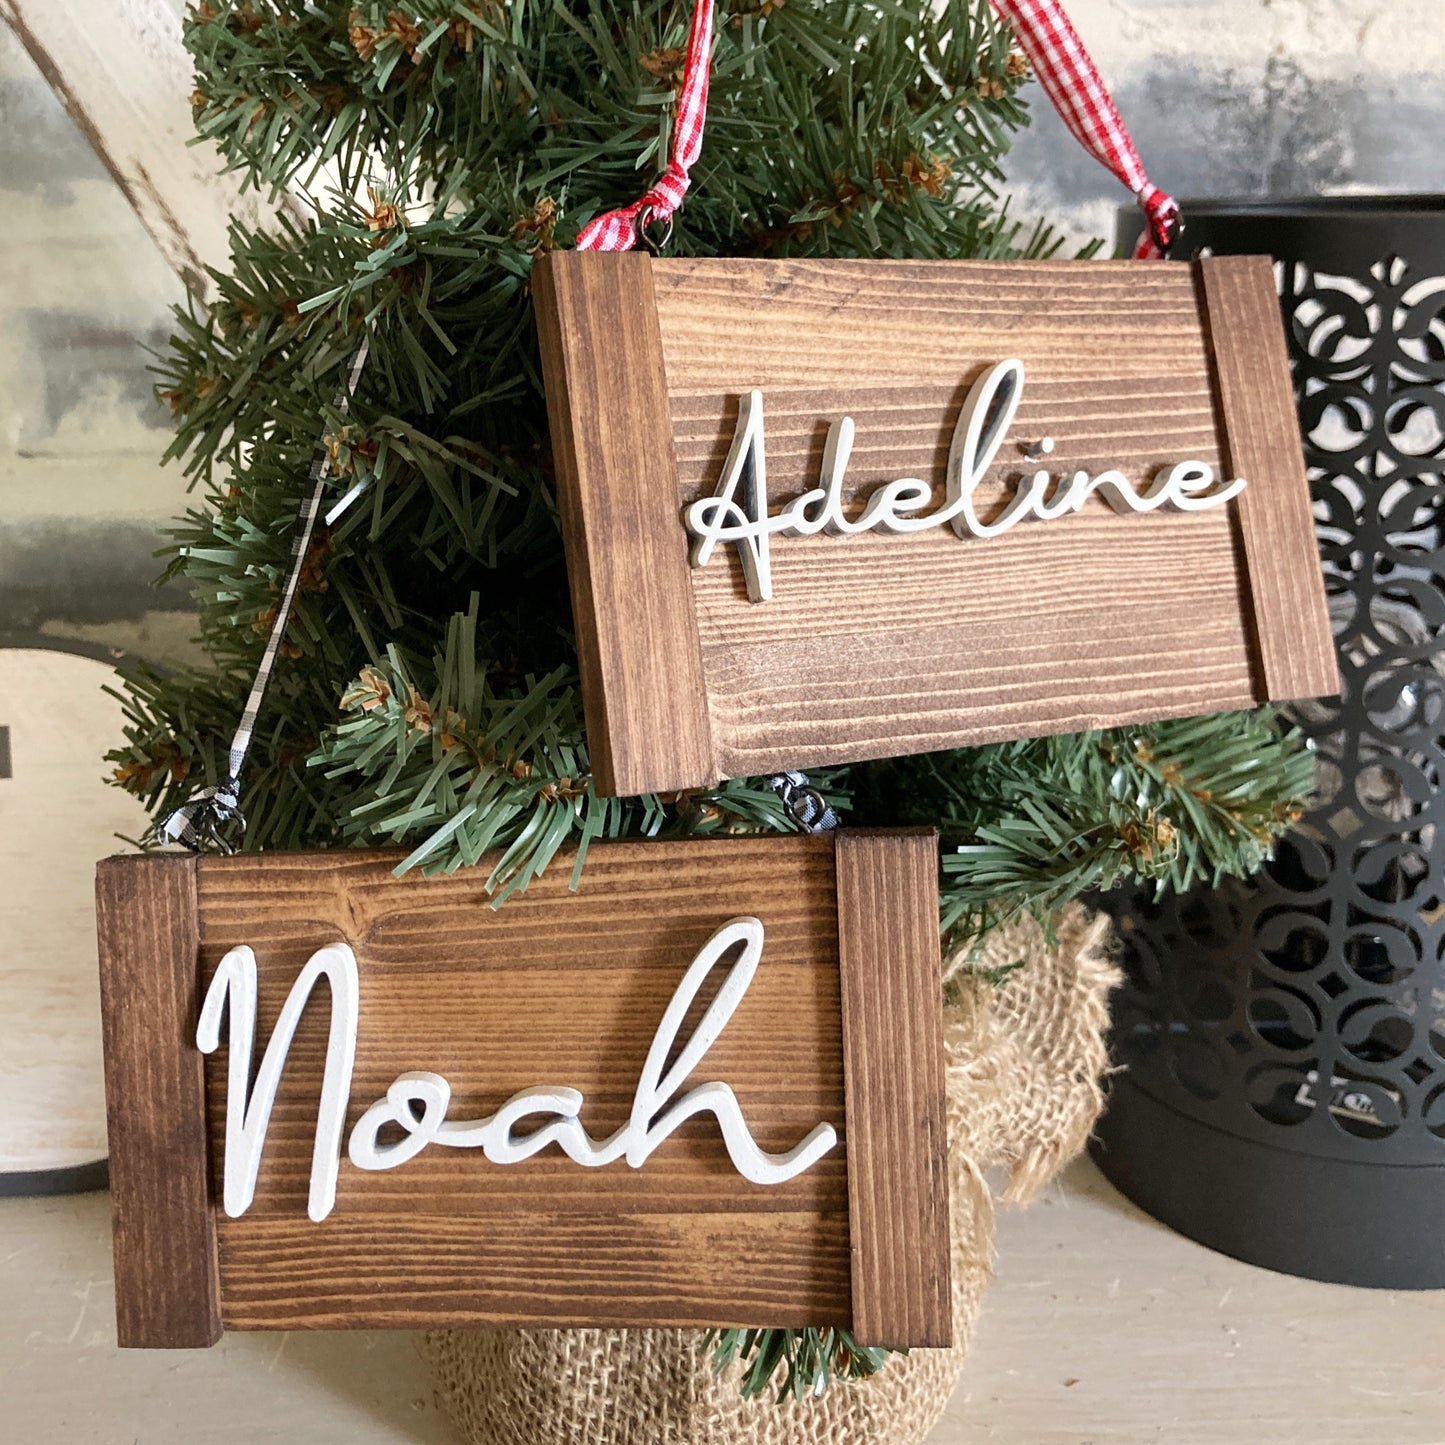 Personalized Ornaments for Your Holiday Decor, Name Christmas Ornaments for The Whole Family